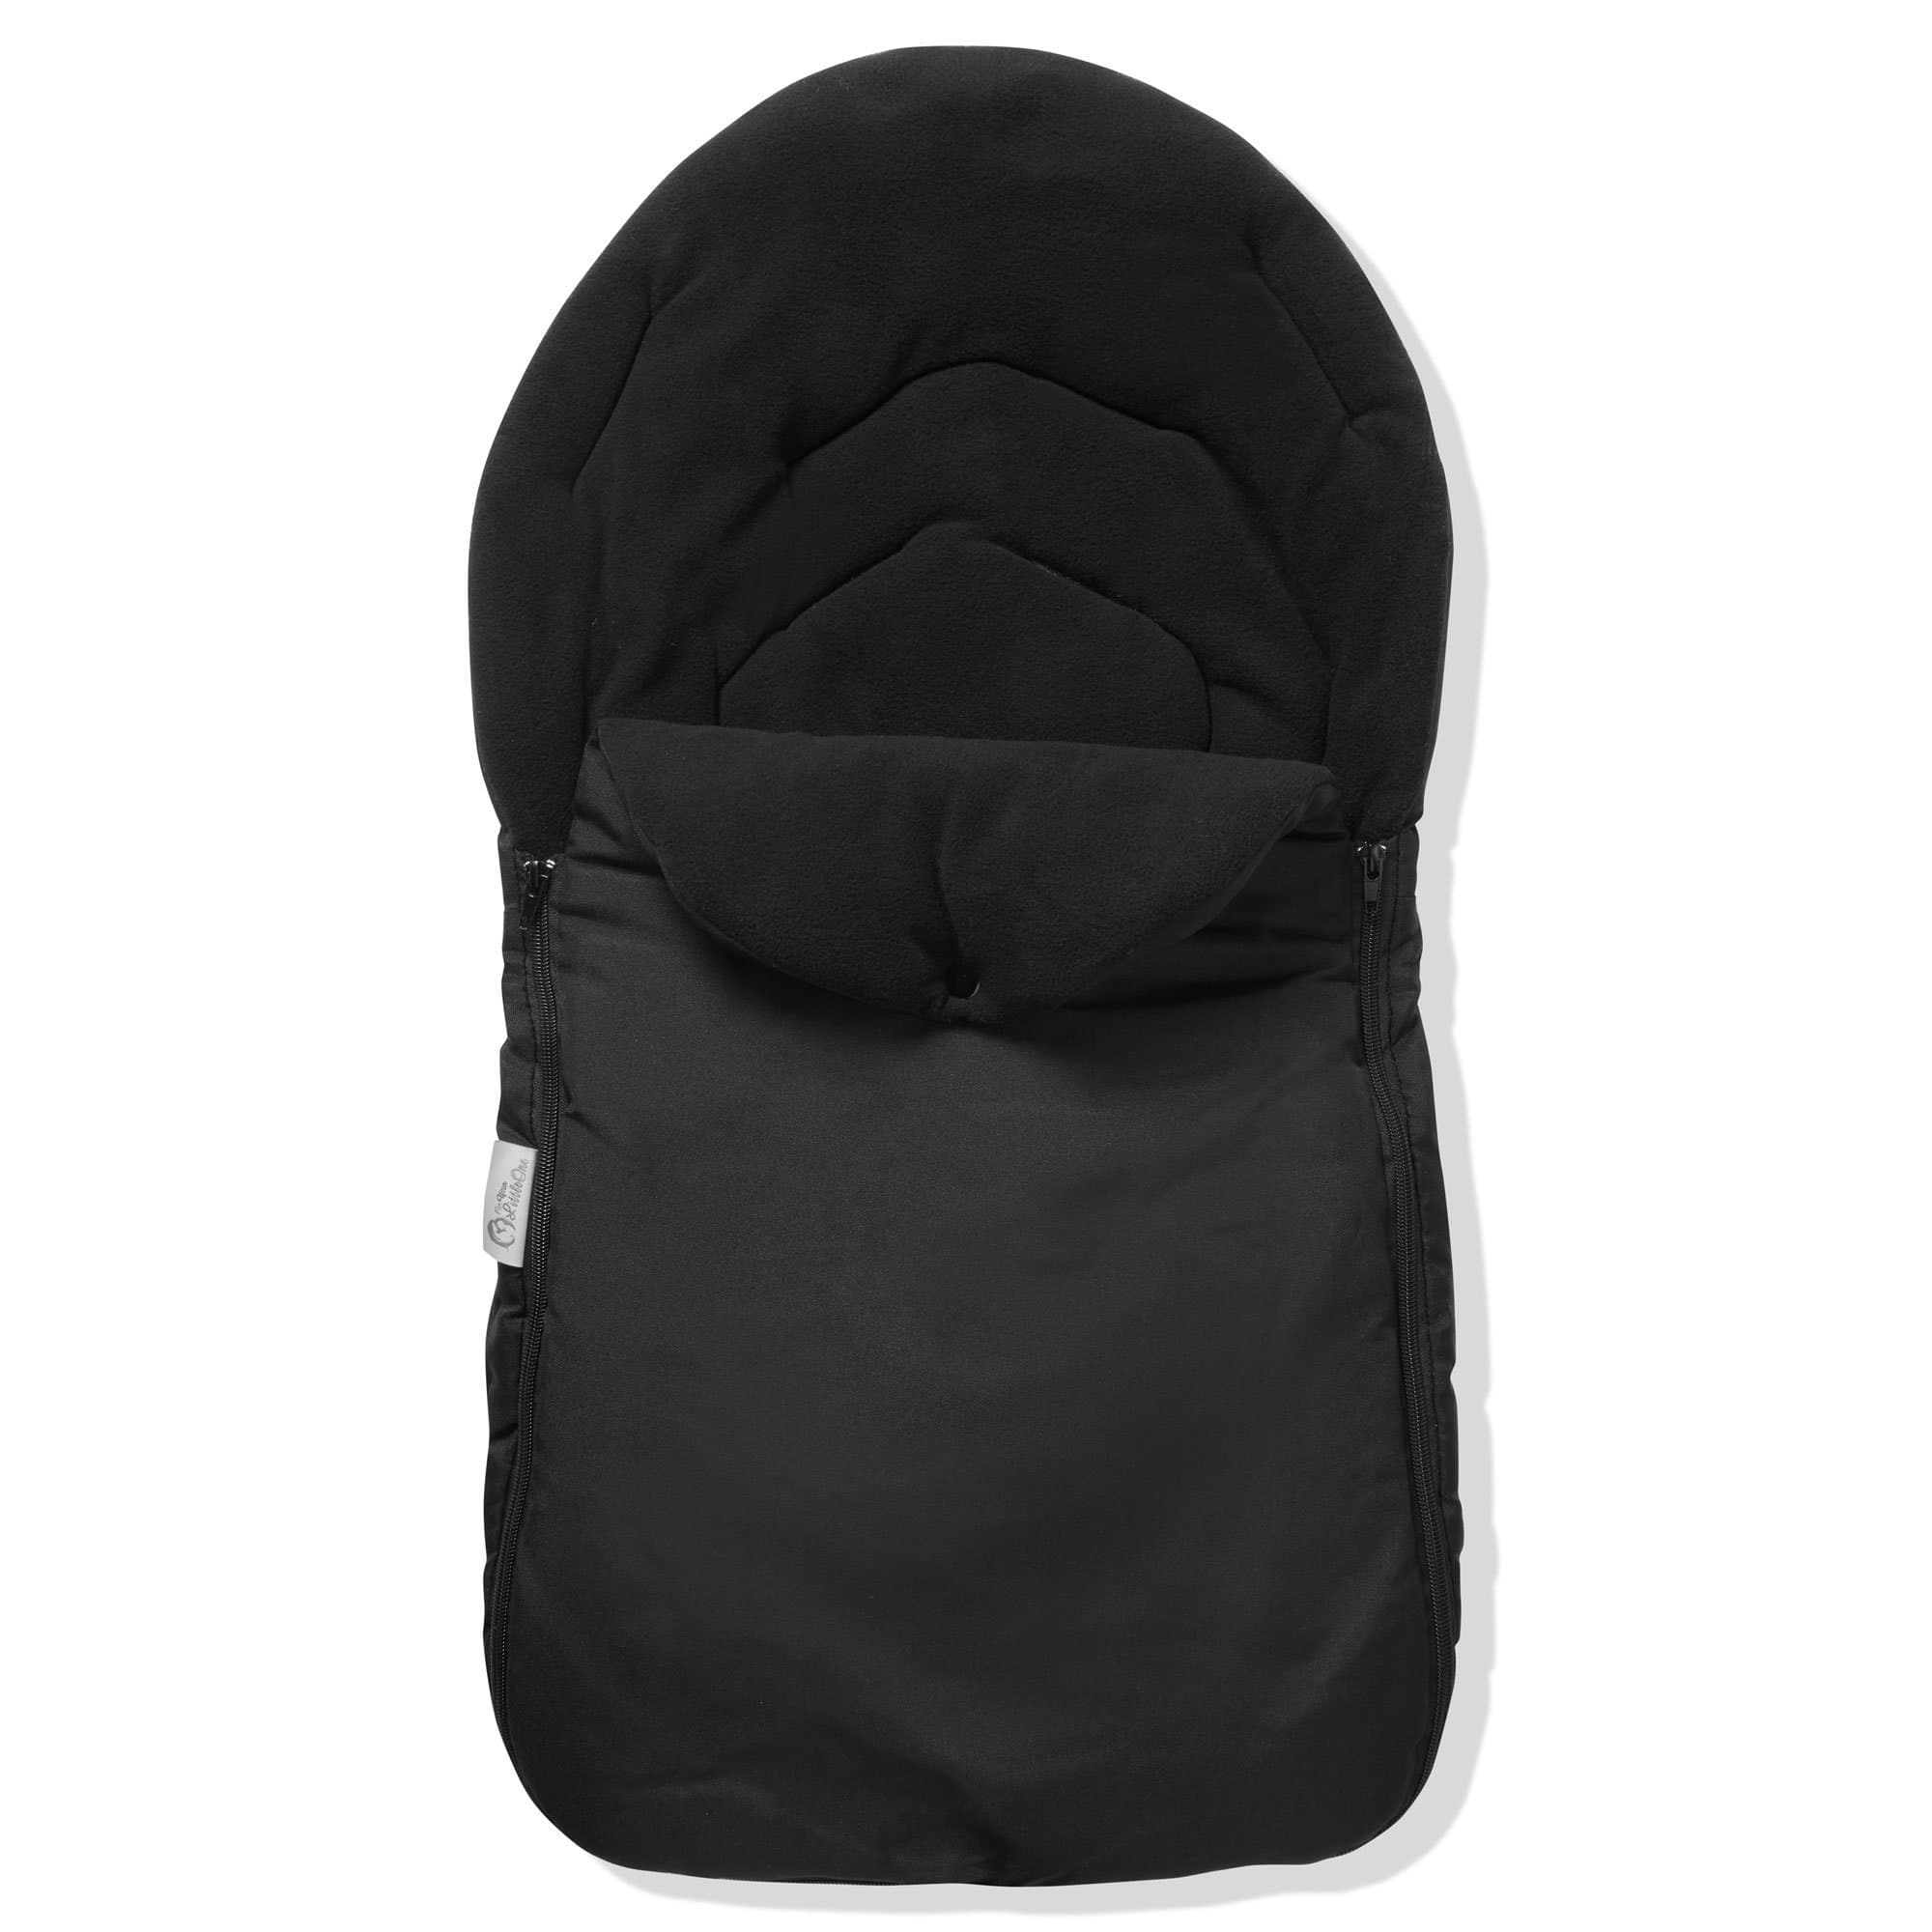 Car Seat Footmuff / Cosy Toes Compatible with Babystyle - Black / Fits All Models | For Your Little One